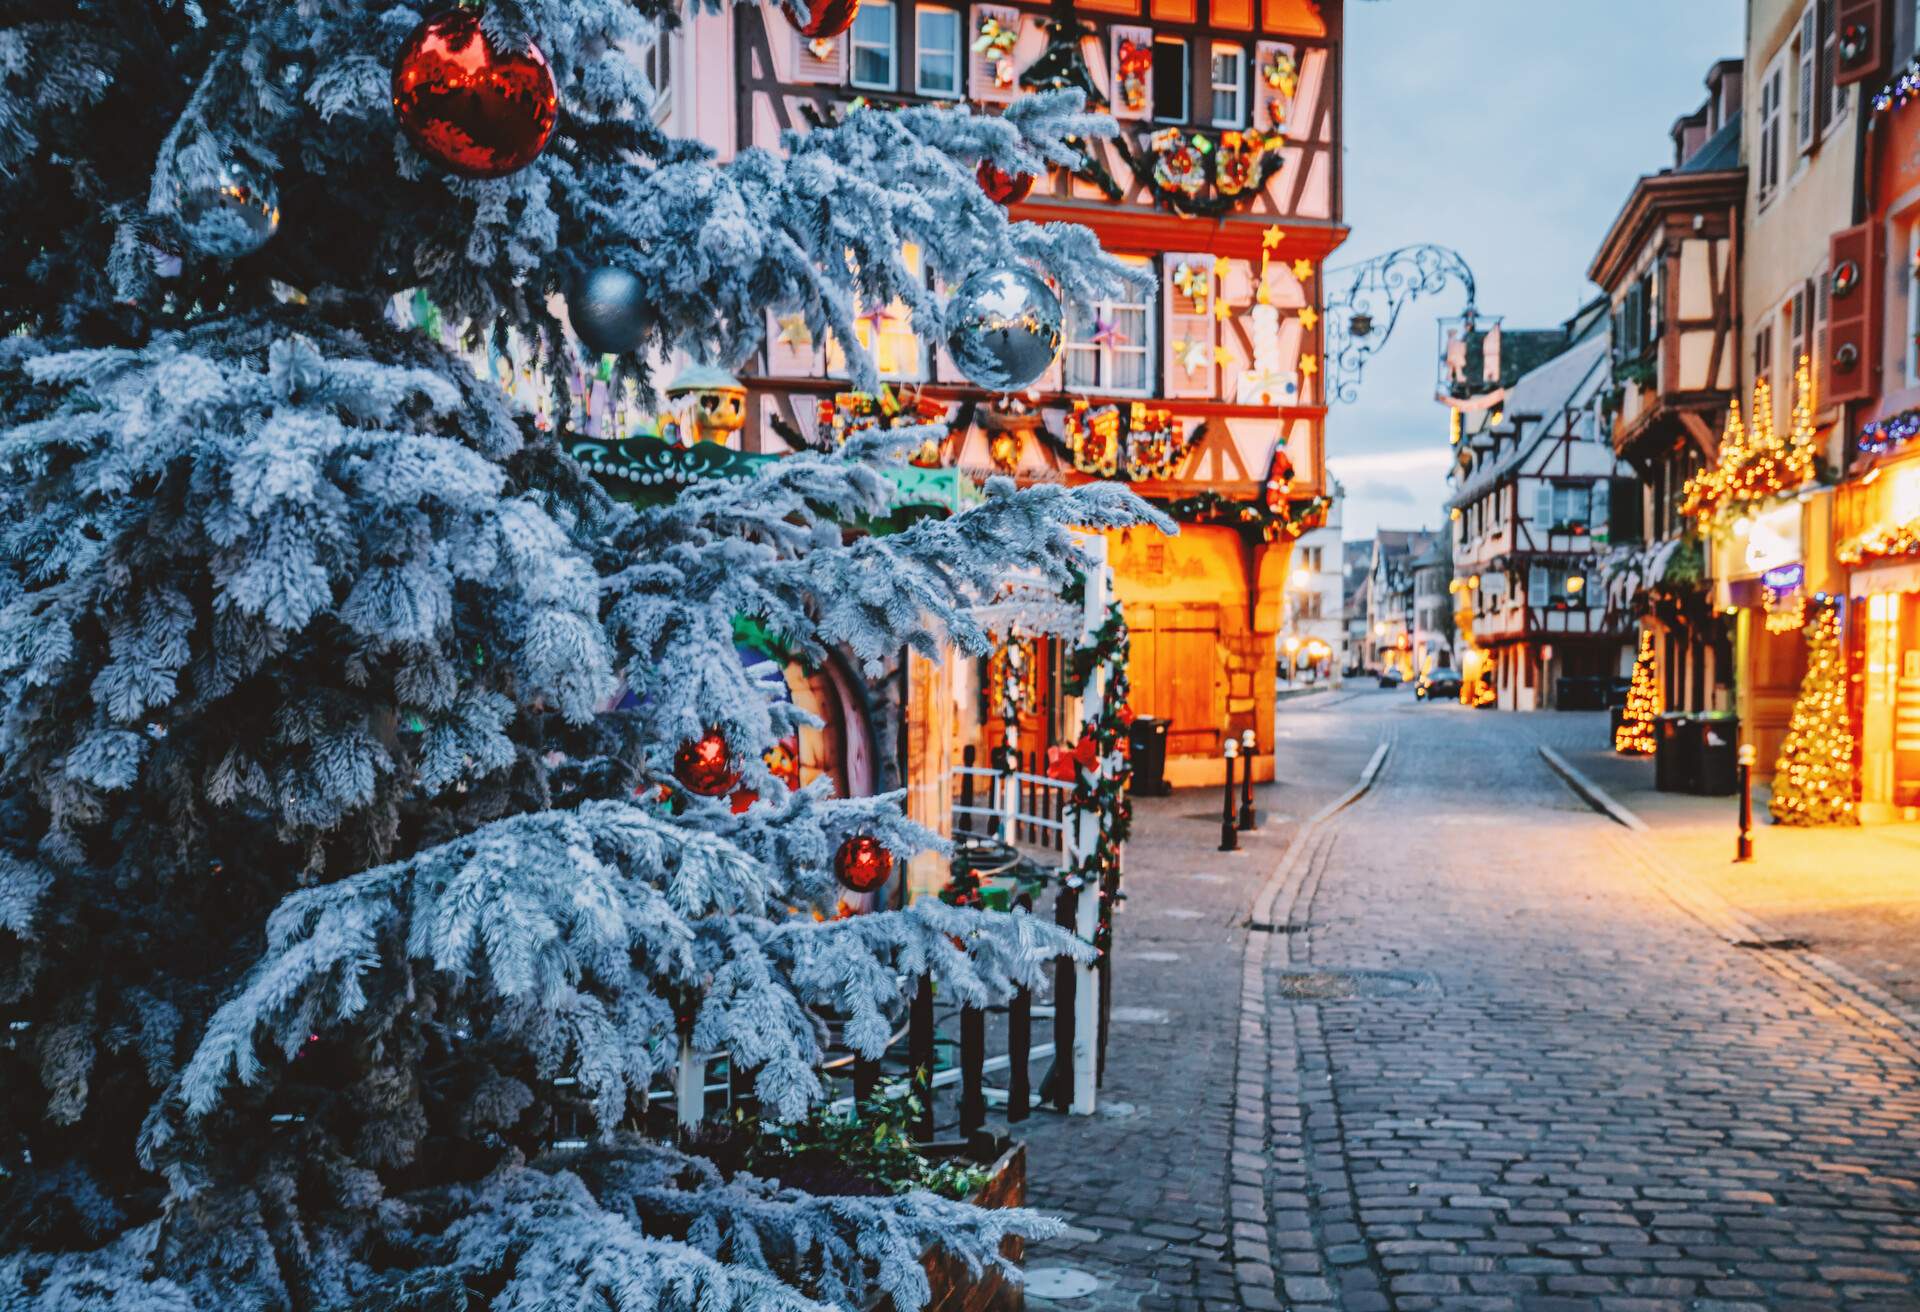 dest_france_alsace_colmar_christmas_gettyimages-1047267964_universal_within-usage-period_93229